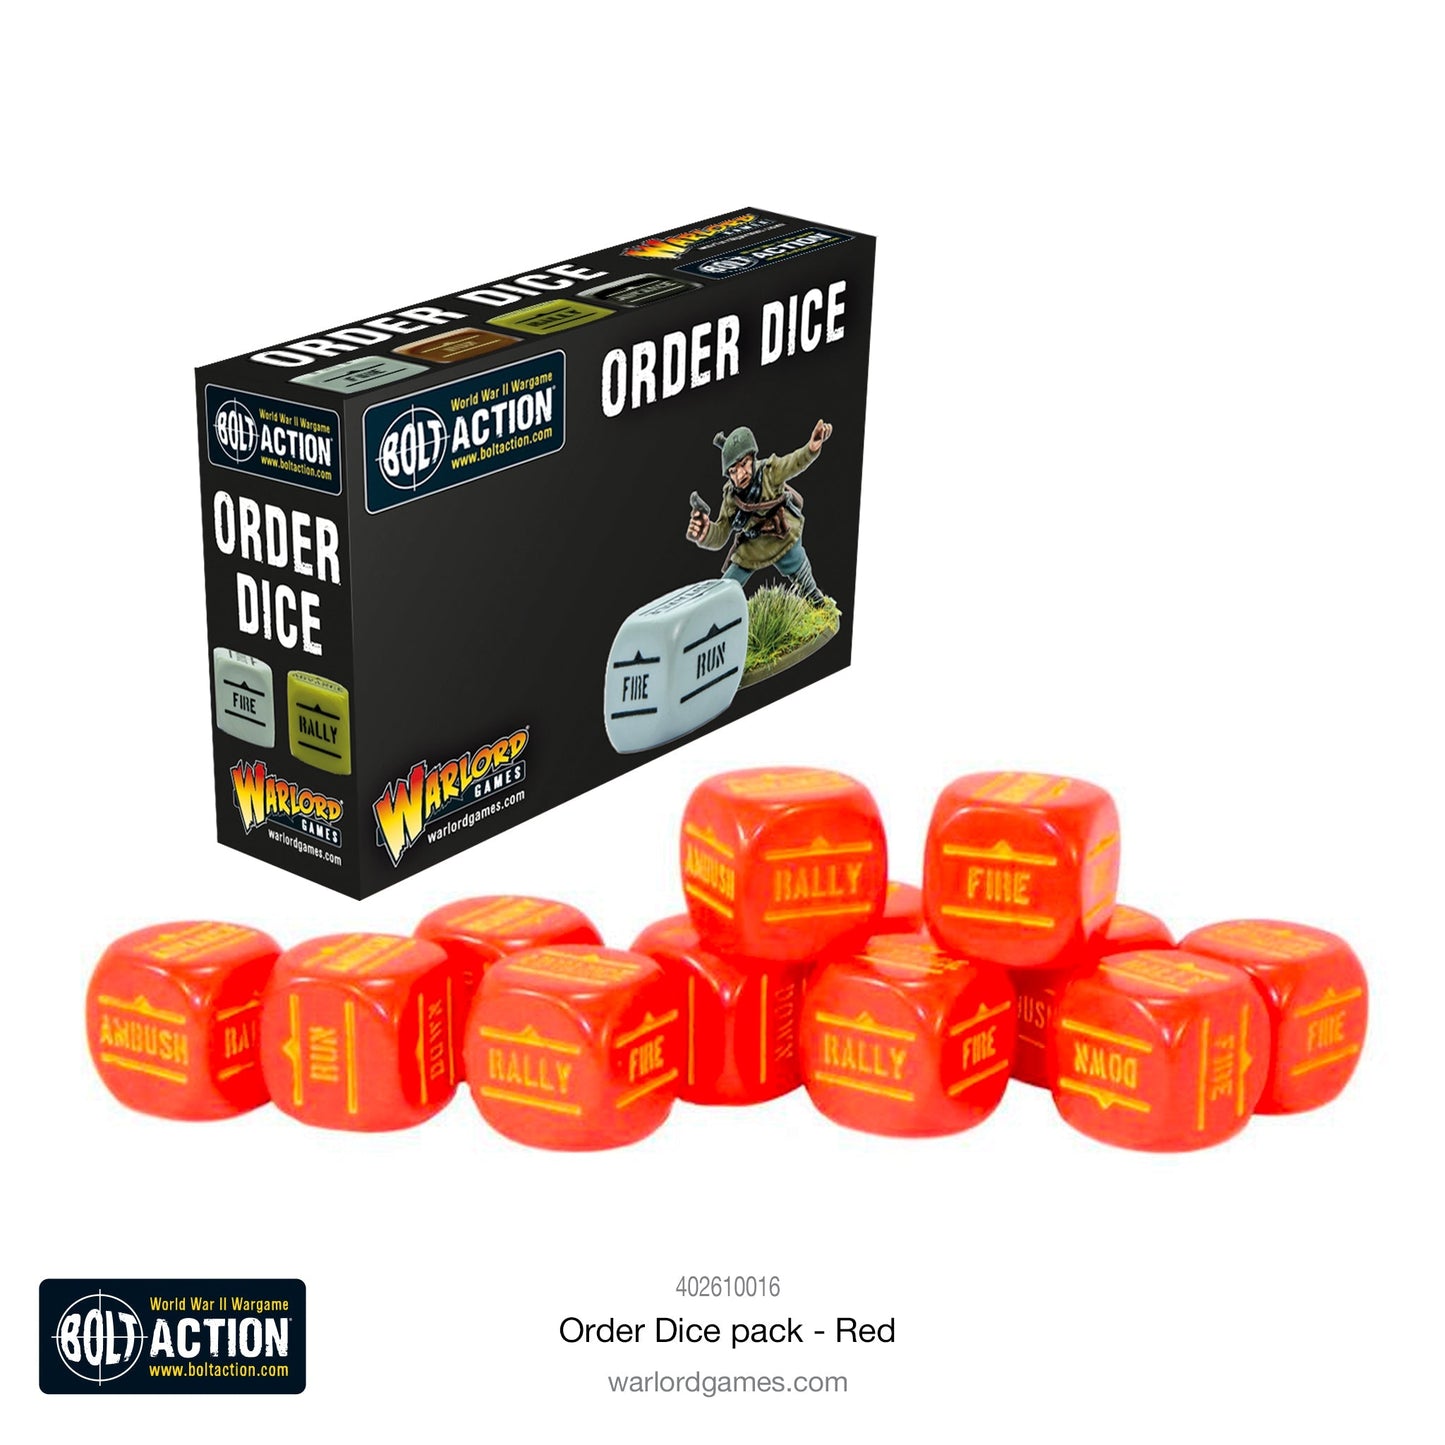 Bolt Action Orders Dice x12 - Red - New